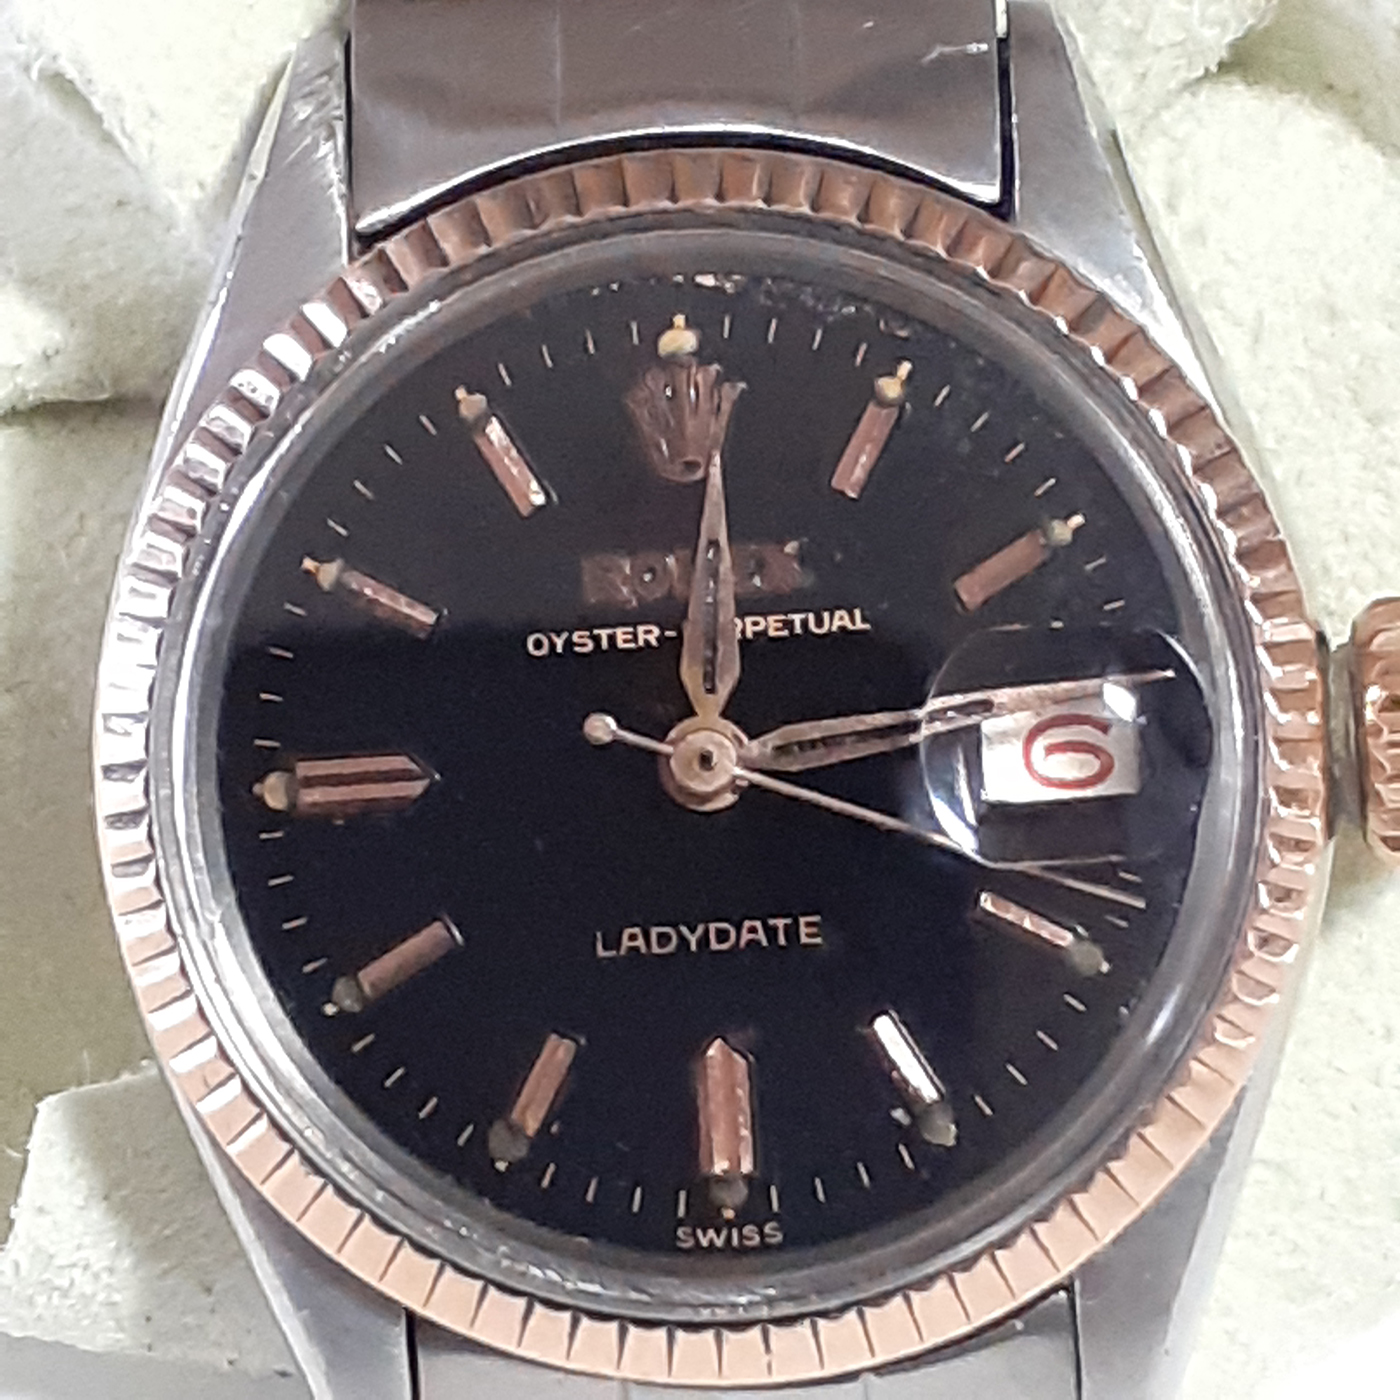 Rolex Oyster Perpetual Ladies Date VINTAGE GILT SPIDER DIAL LADYDATE VERY RARE ROSE GOLD 6517